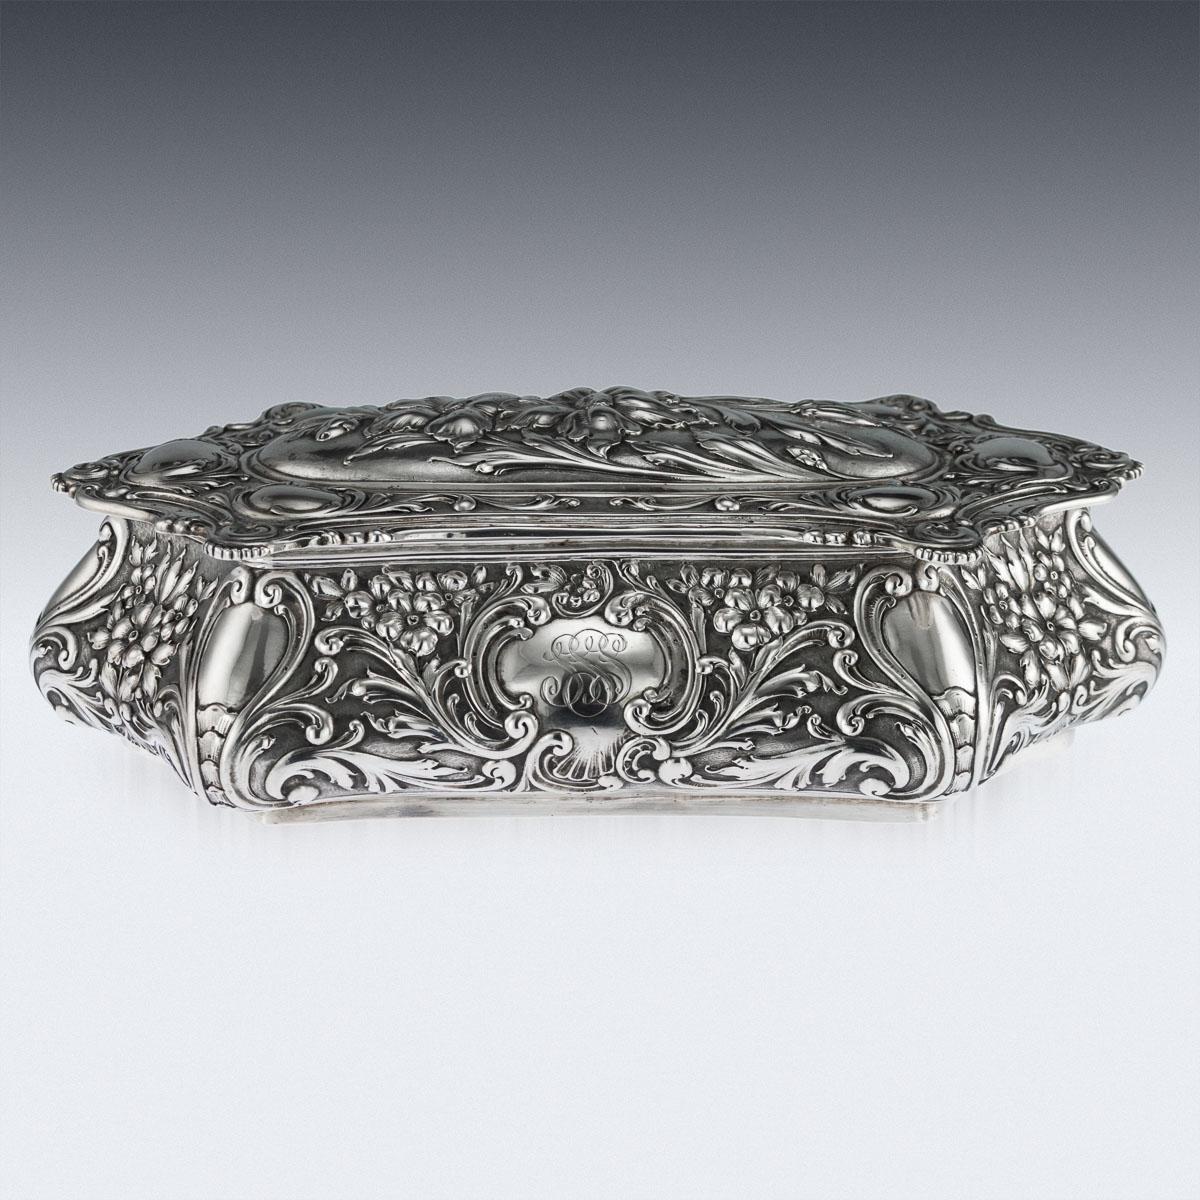 Antique early-20th century German Art Nouveau solid silver jewelry box, bombe shape with six sides, heavy gauge, decorated with repoussé decoration, depicting flowers and scrolls, the front engraved with initials. Hallmarked with German (Hanau),